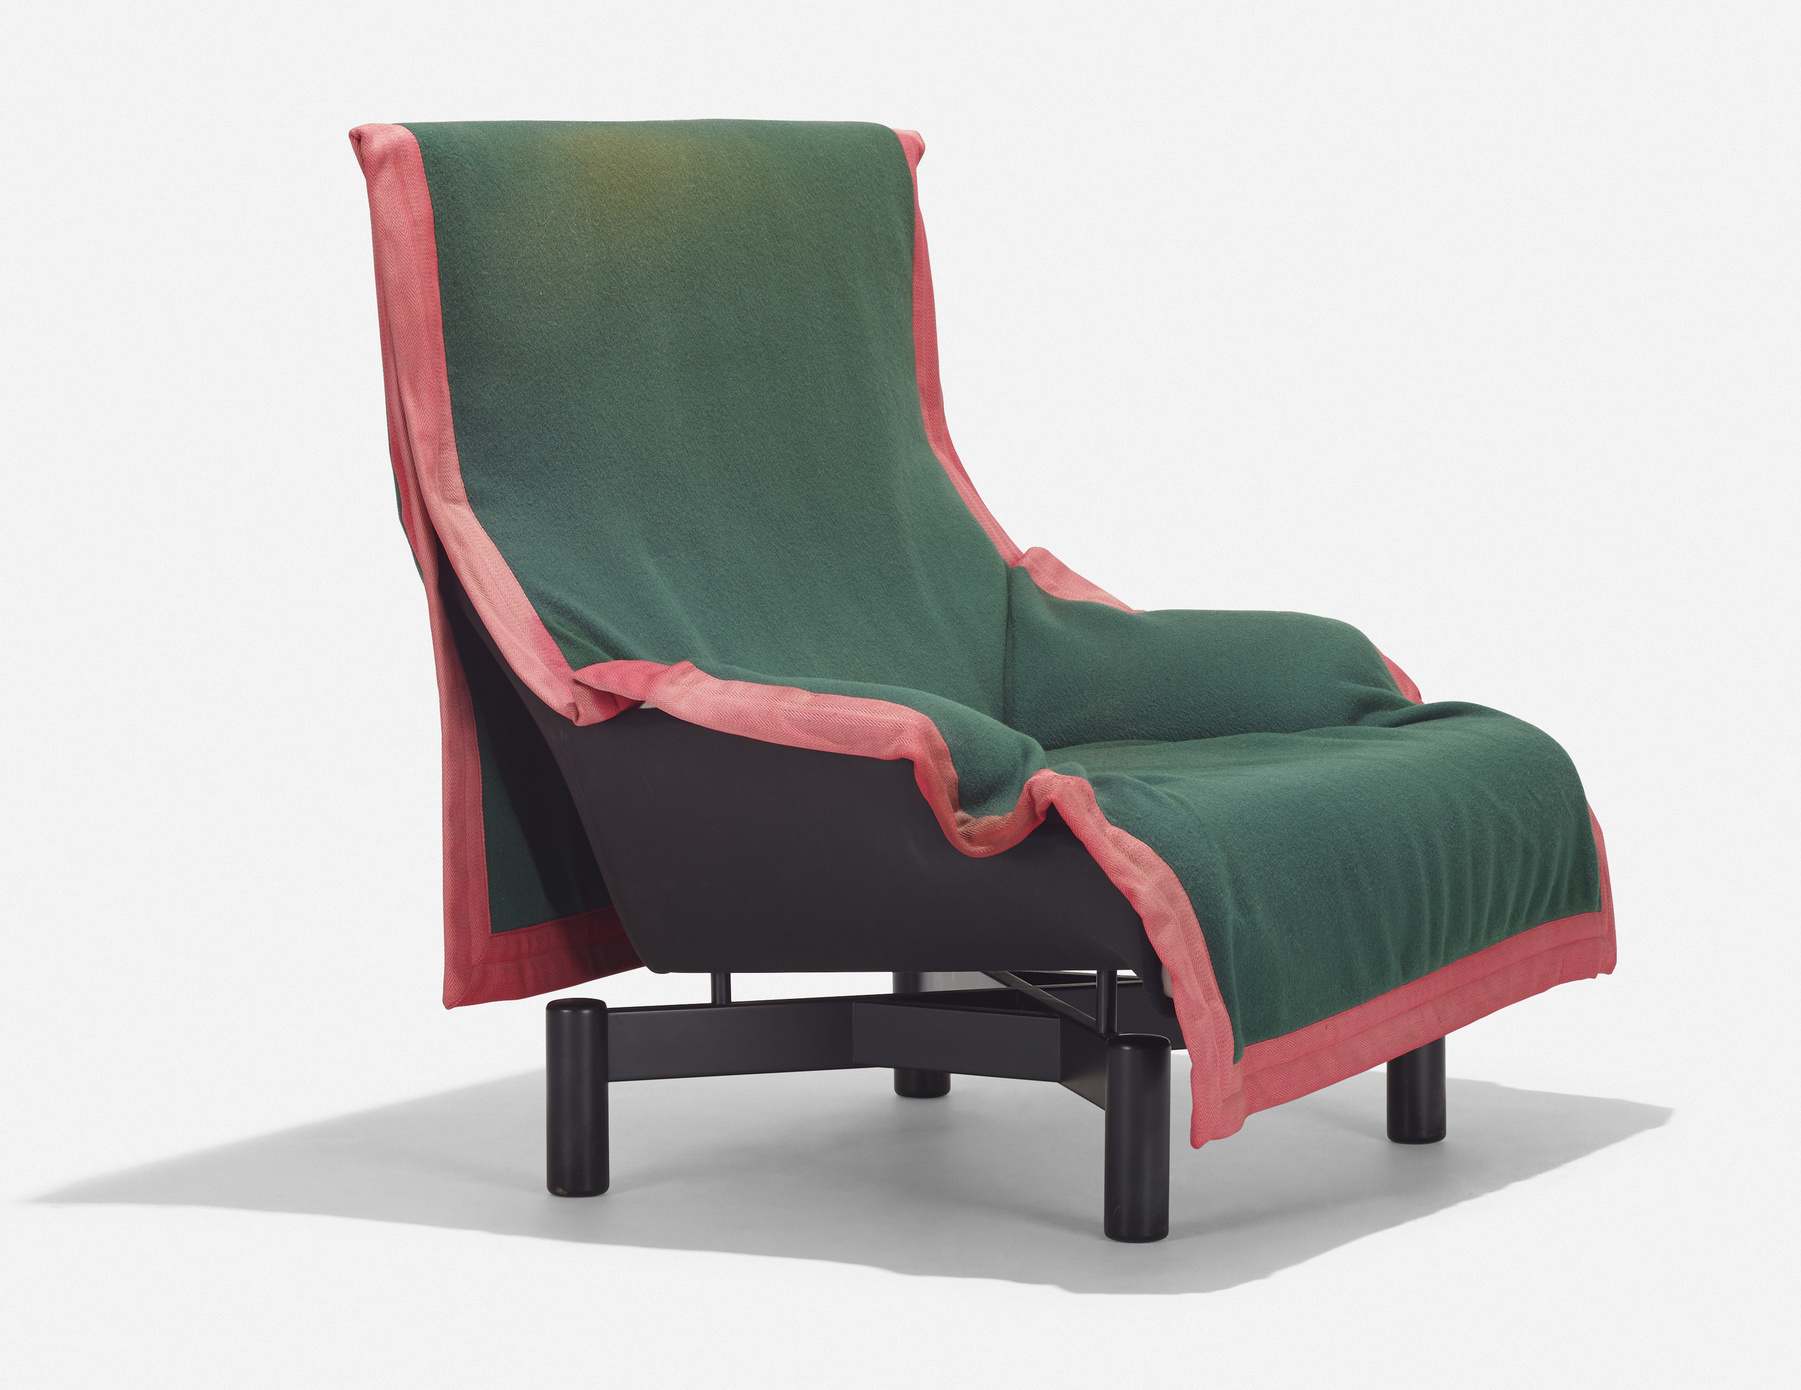 314_1_paul_rand_the_art_of_design_september_2018_vico_magistretti_sinbad_lounge_chair__wright_auction